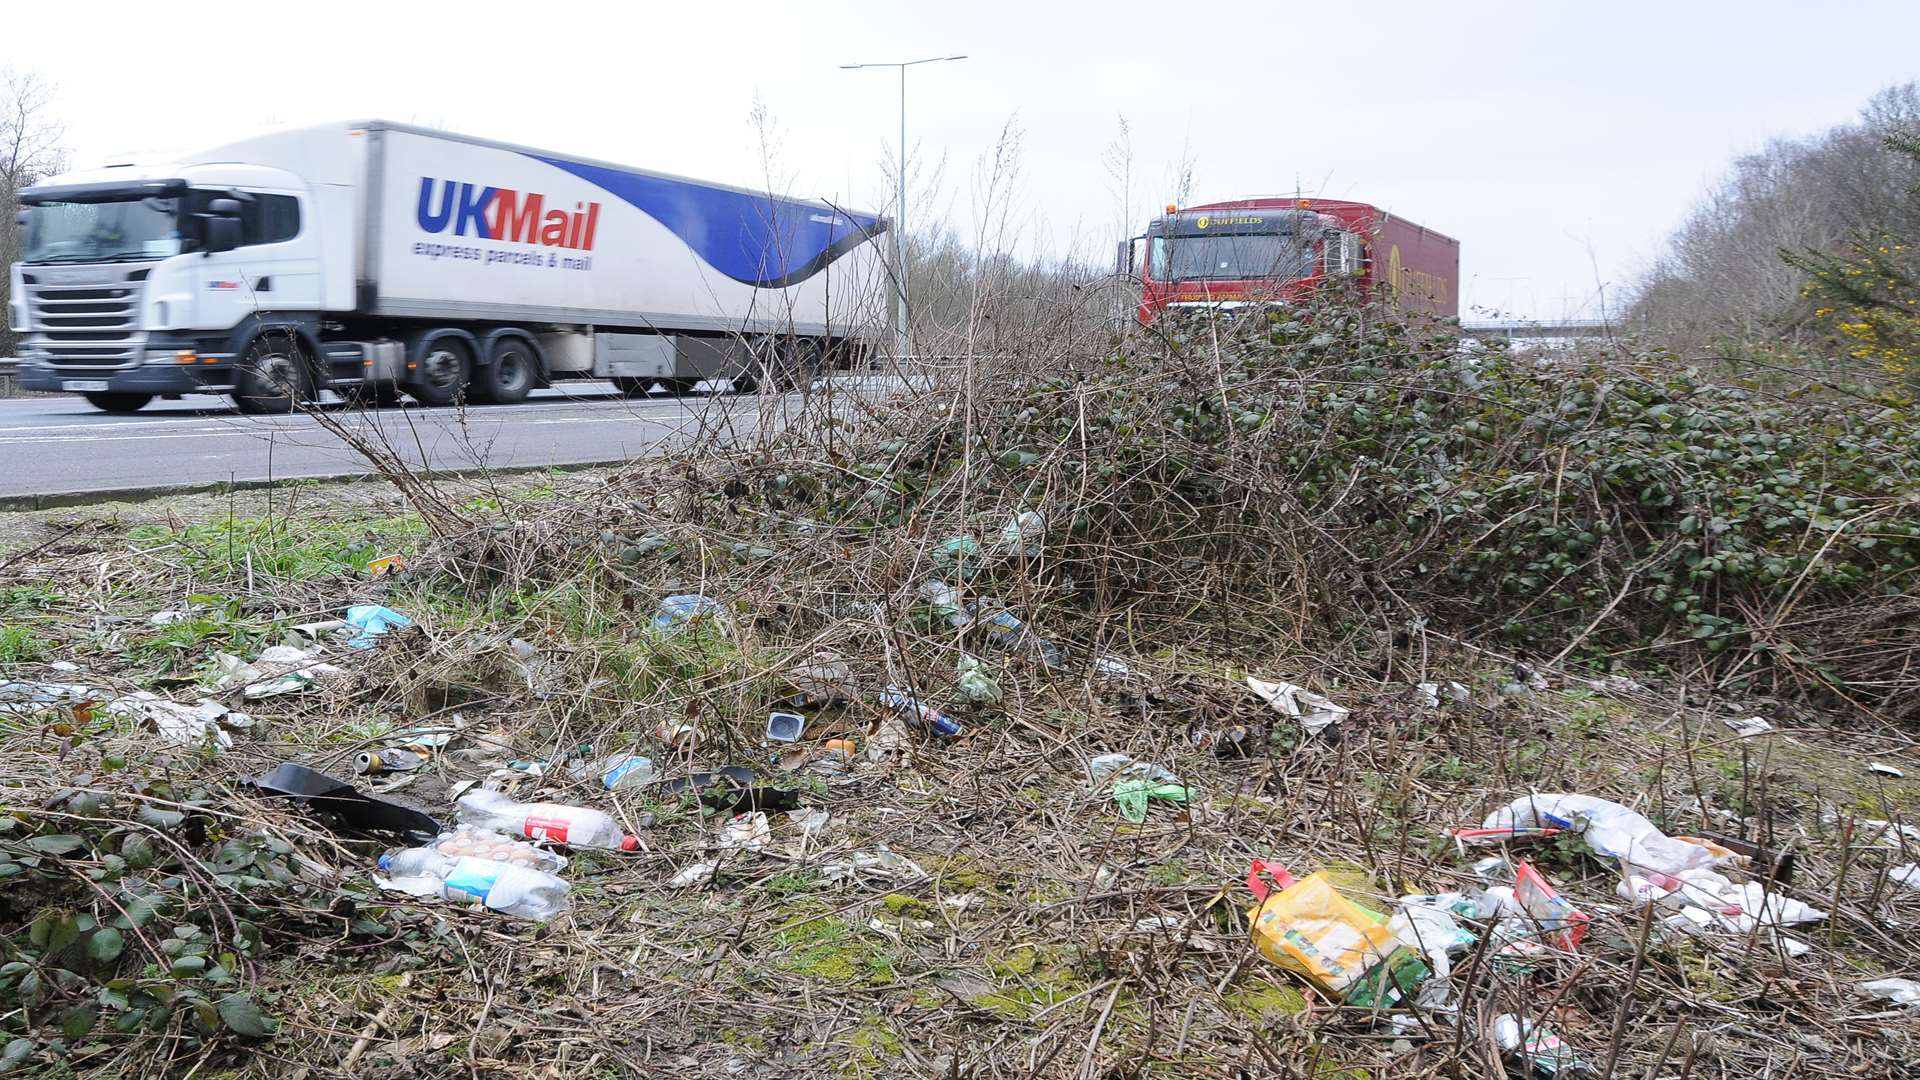 Rubbish in verges along the A2 and Thanet Way give a bad impression of the UK, says a Tory councillor